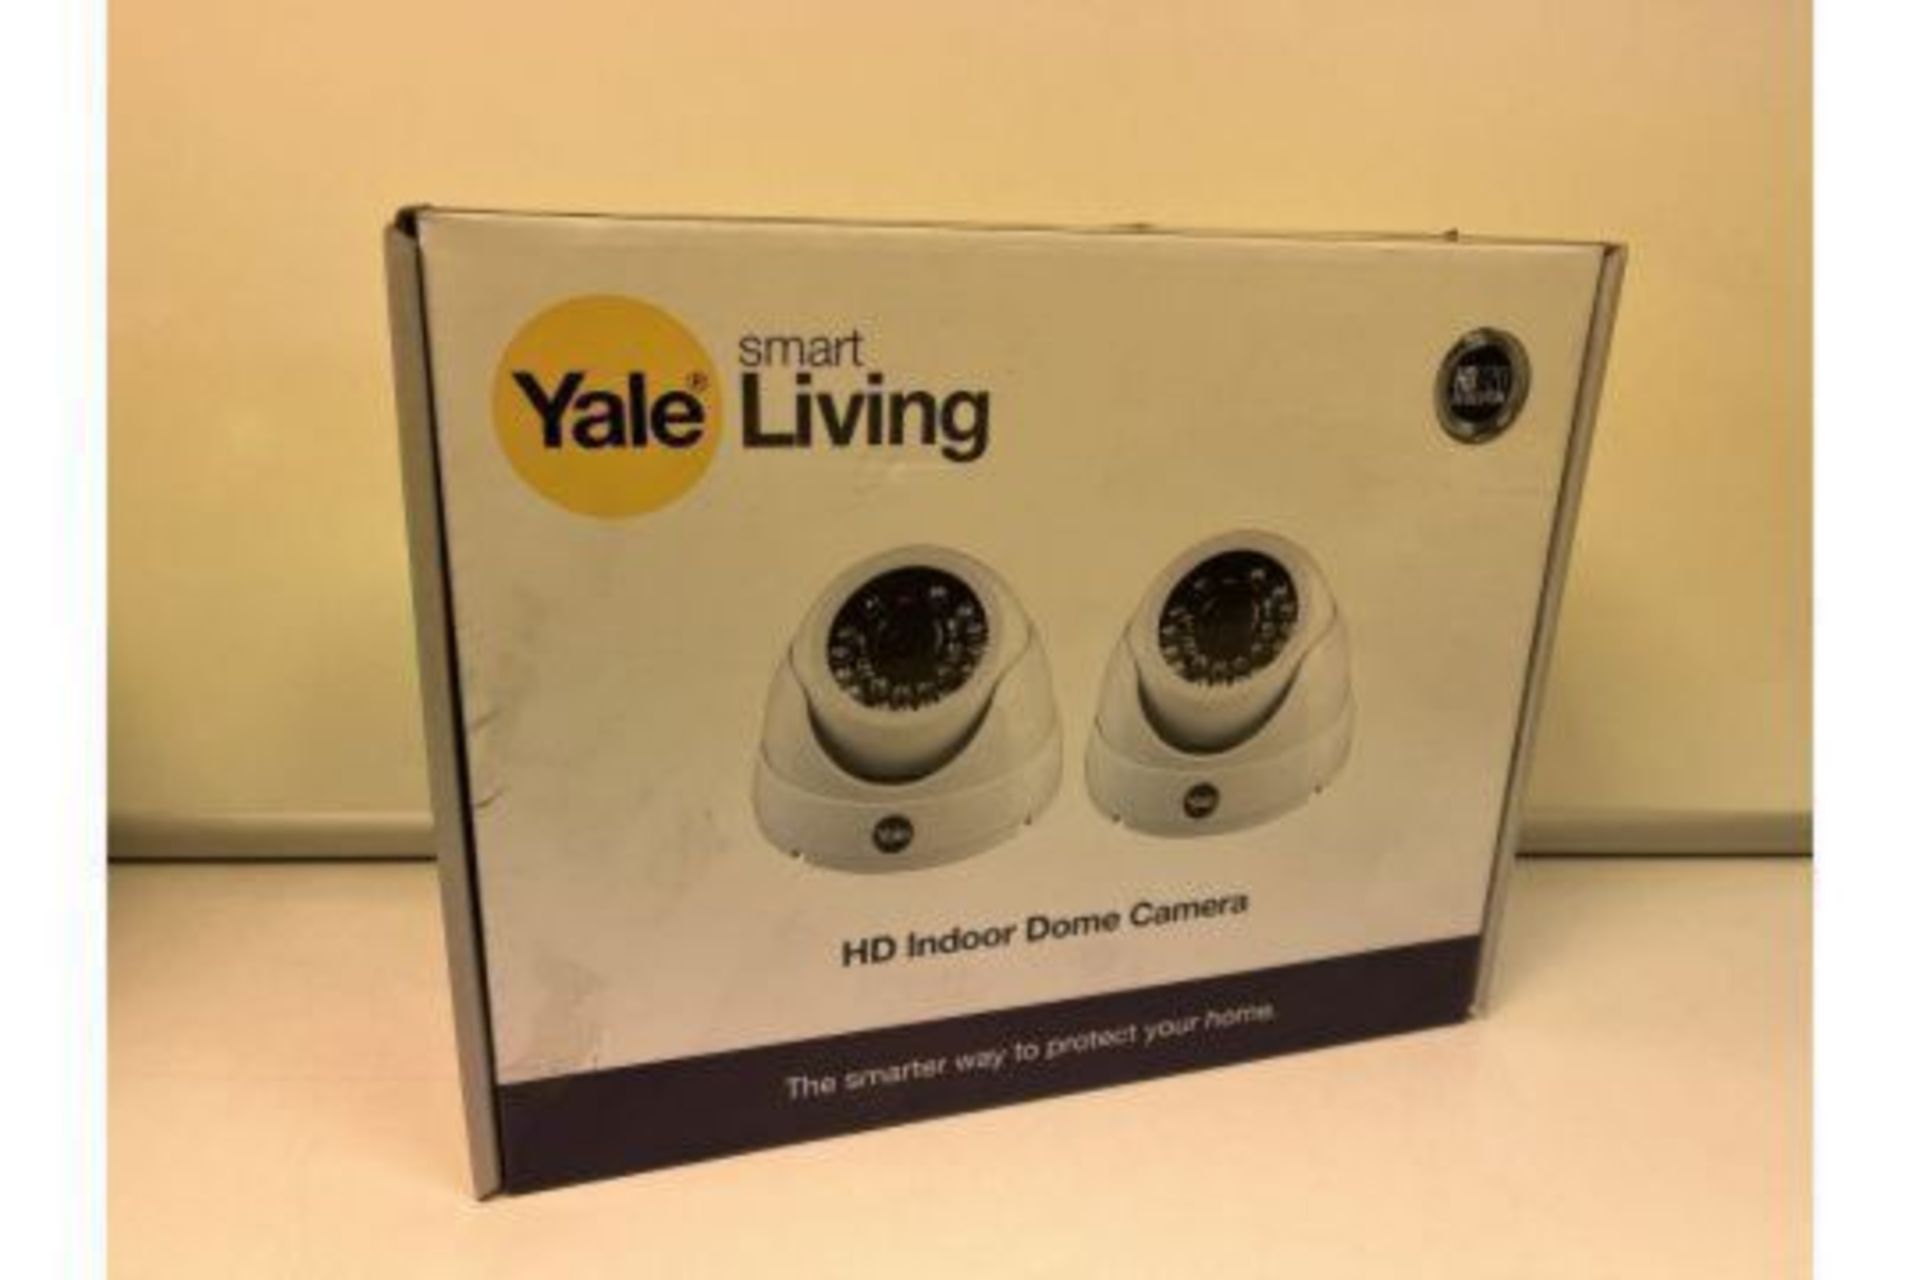 3 X NEW BOXED SETS OF 2 YALE SMART LIVING HD DOME CAMERAS. HD720 RESOLUTION WITH IR NIGHT VISION (